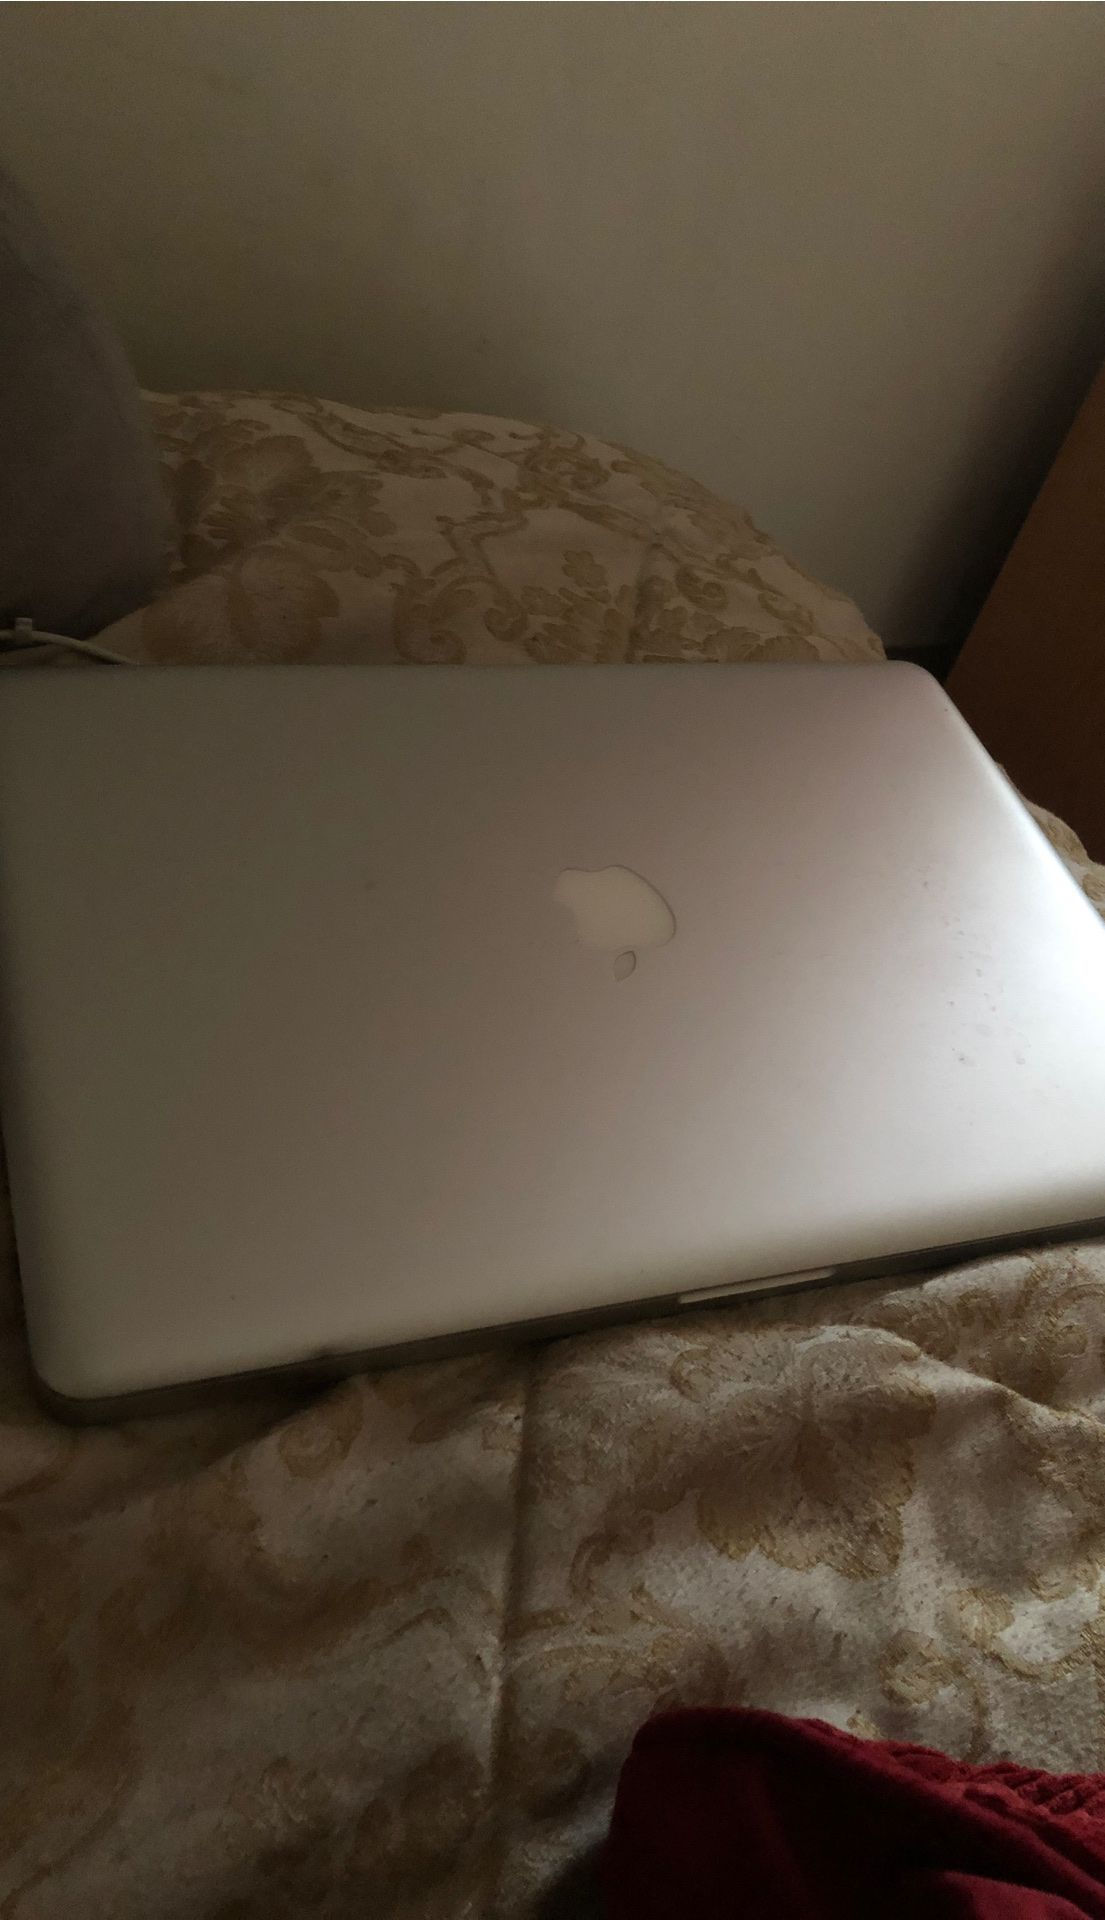 Macbook pro 15” 2008 w/ssd and a mixer